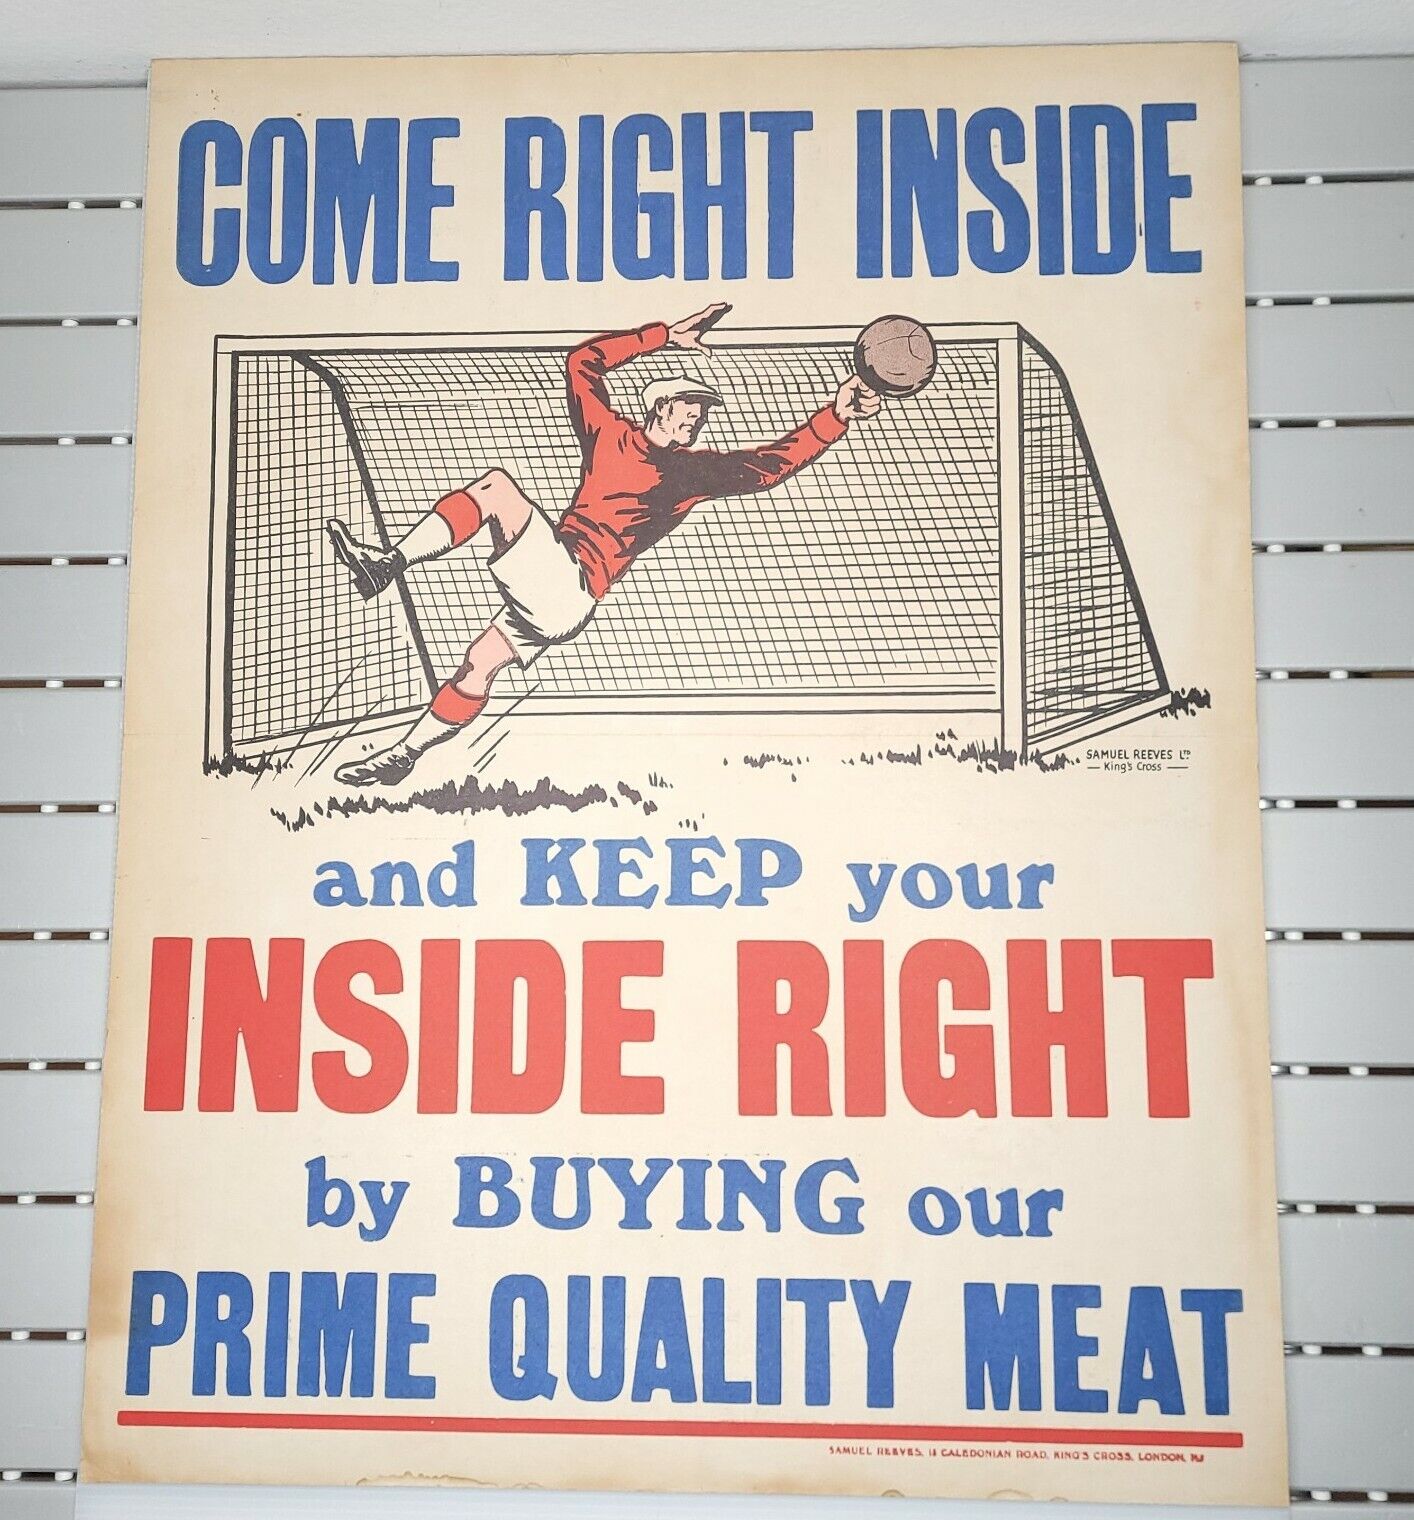 Vintage Rare Ad Poster For Meat w/ Football Soccer Goalie - Samuel Reeves London